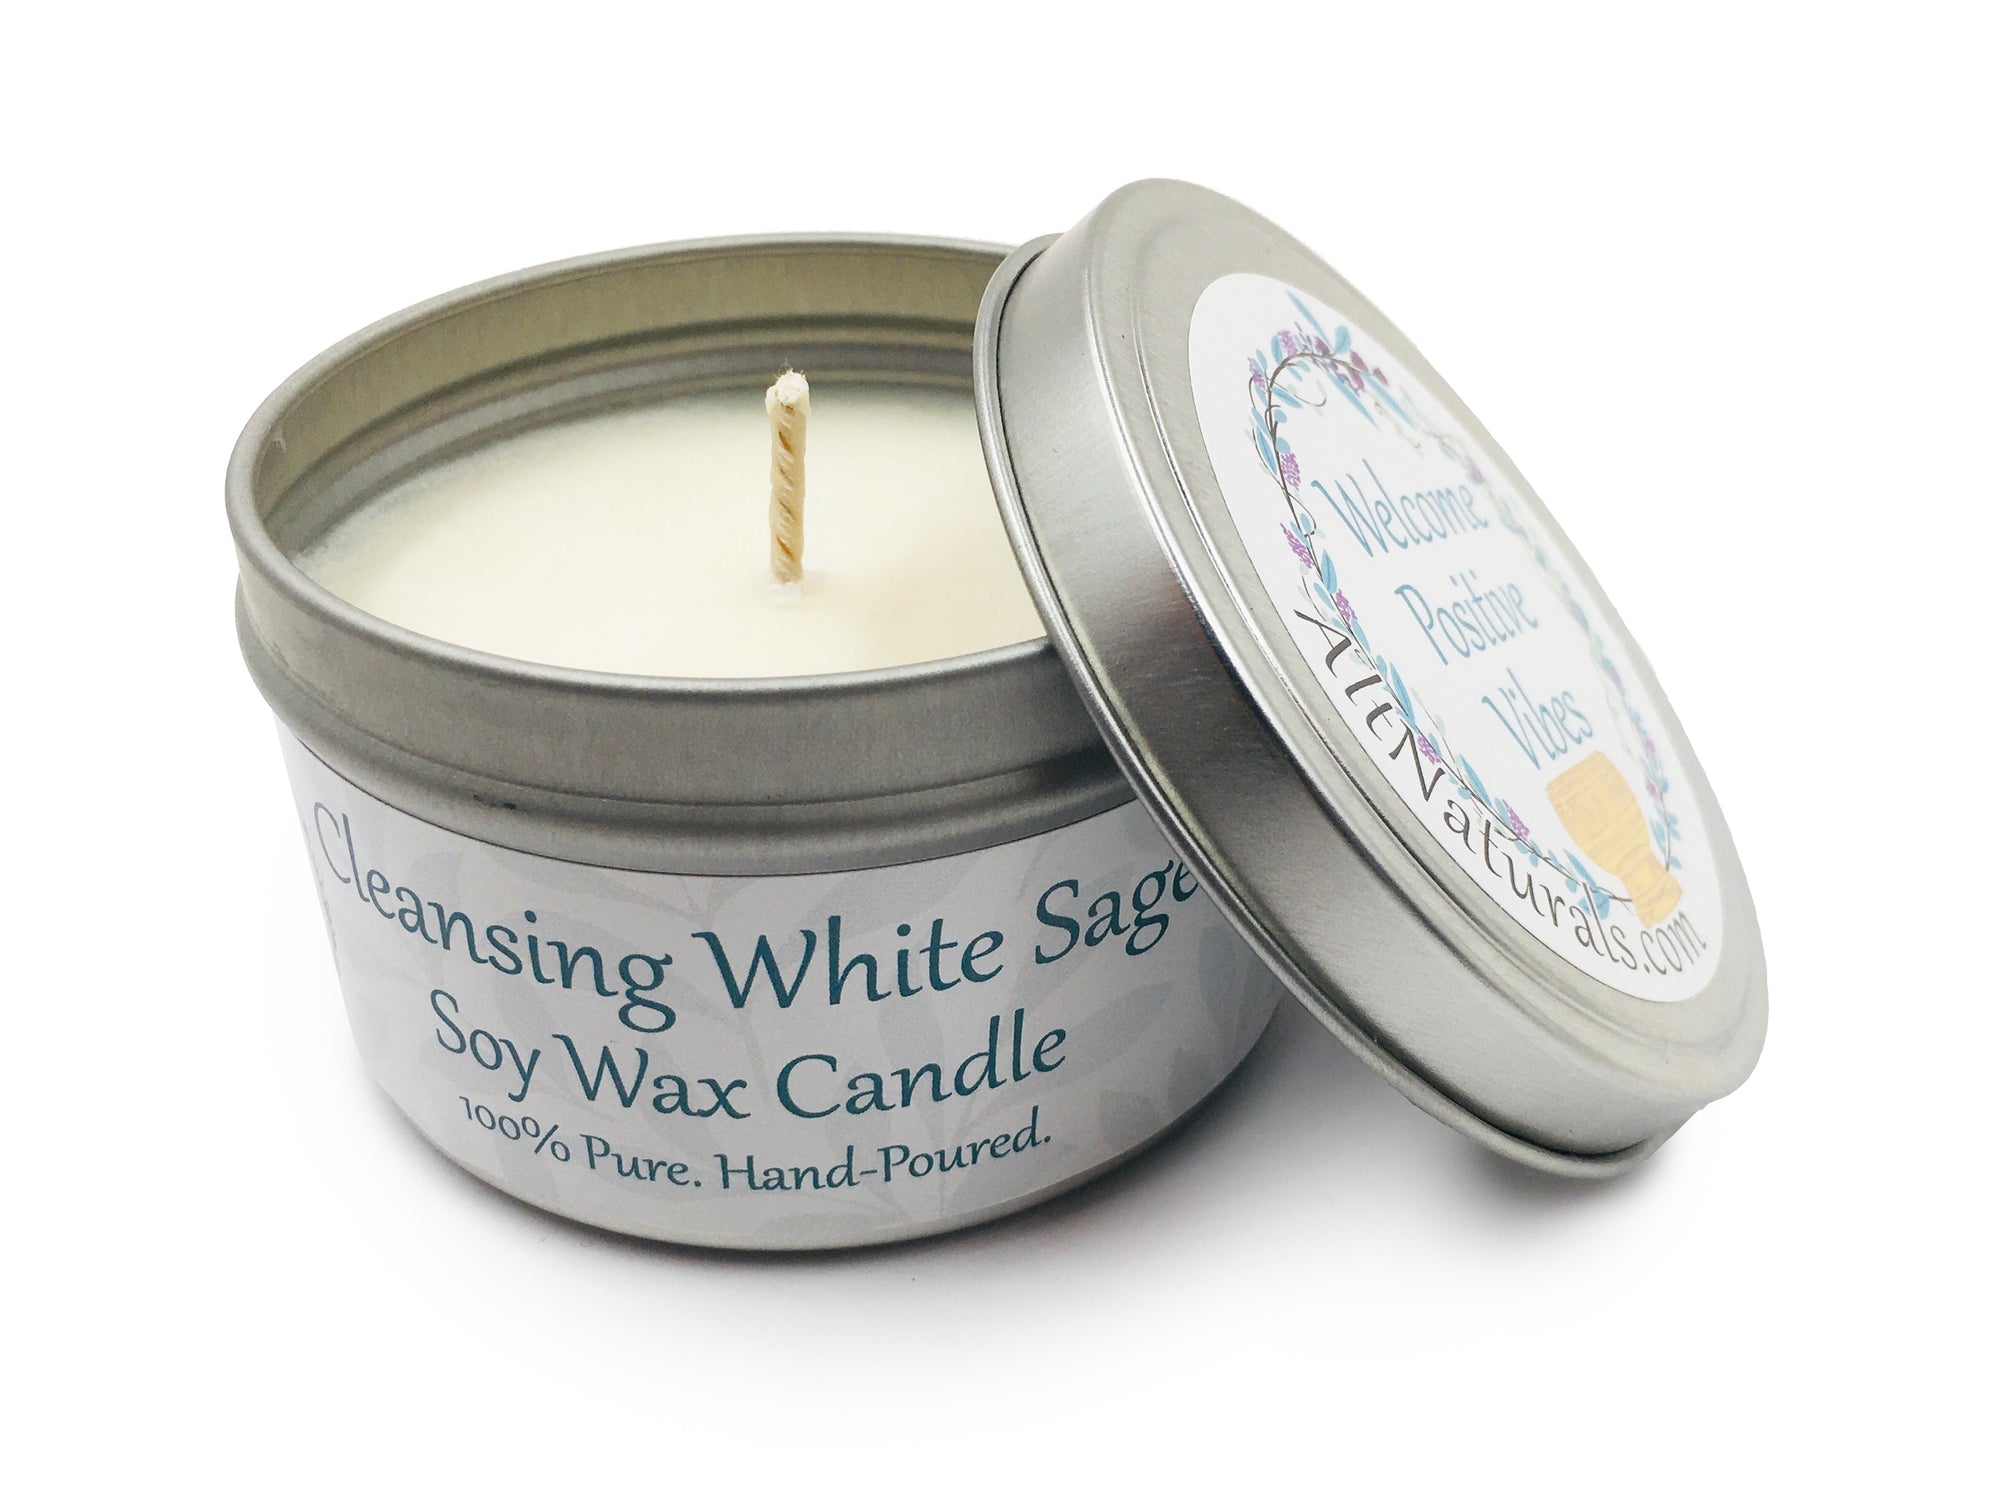 Cleansing White Sage Soy Candles - 6 Ounce (1)